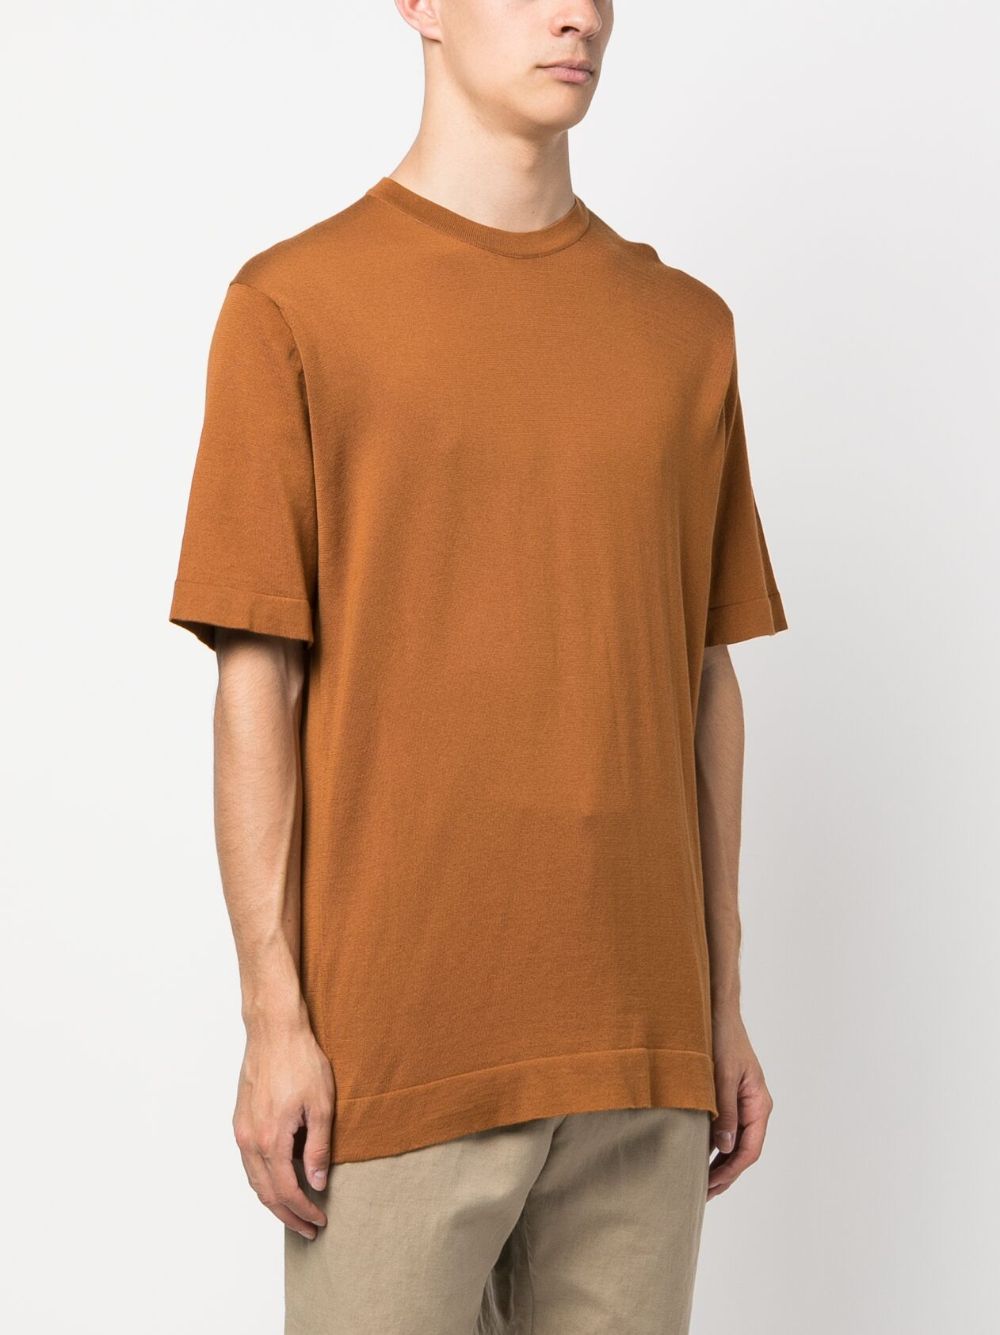 John Smedley Knitted Cotton T-shirt In Brown | ModeSens